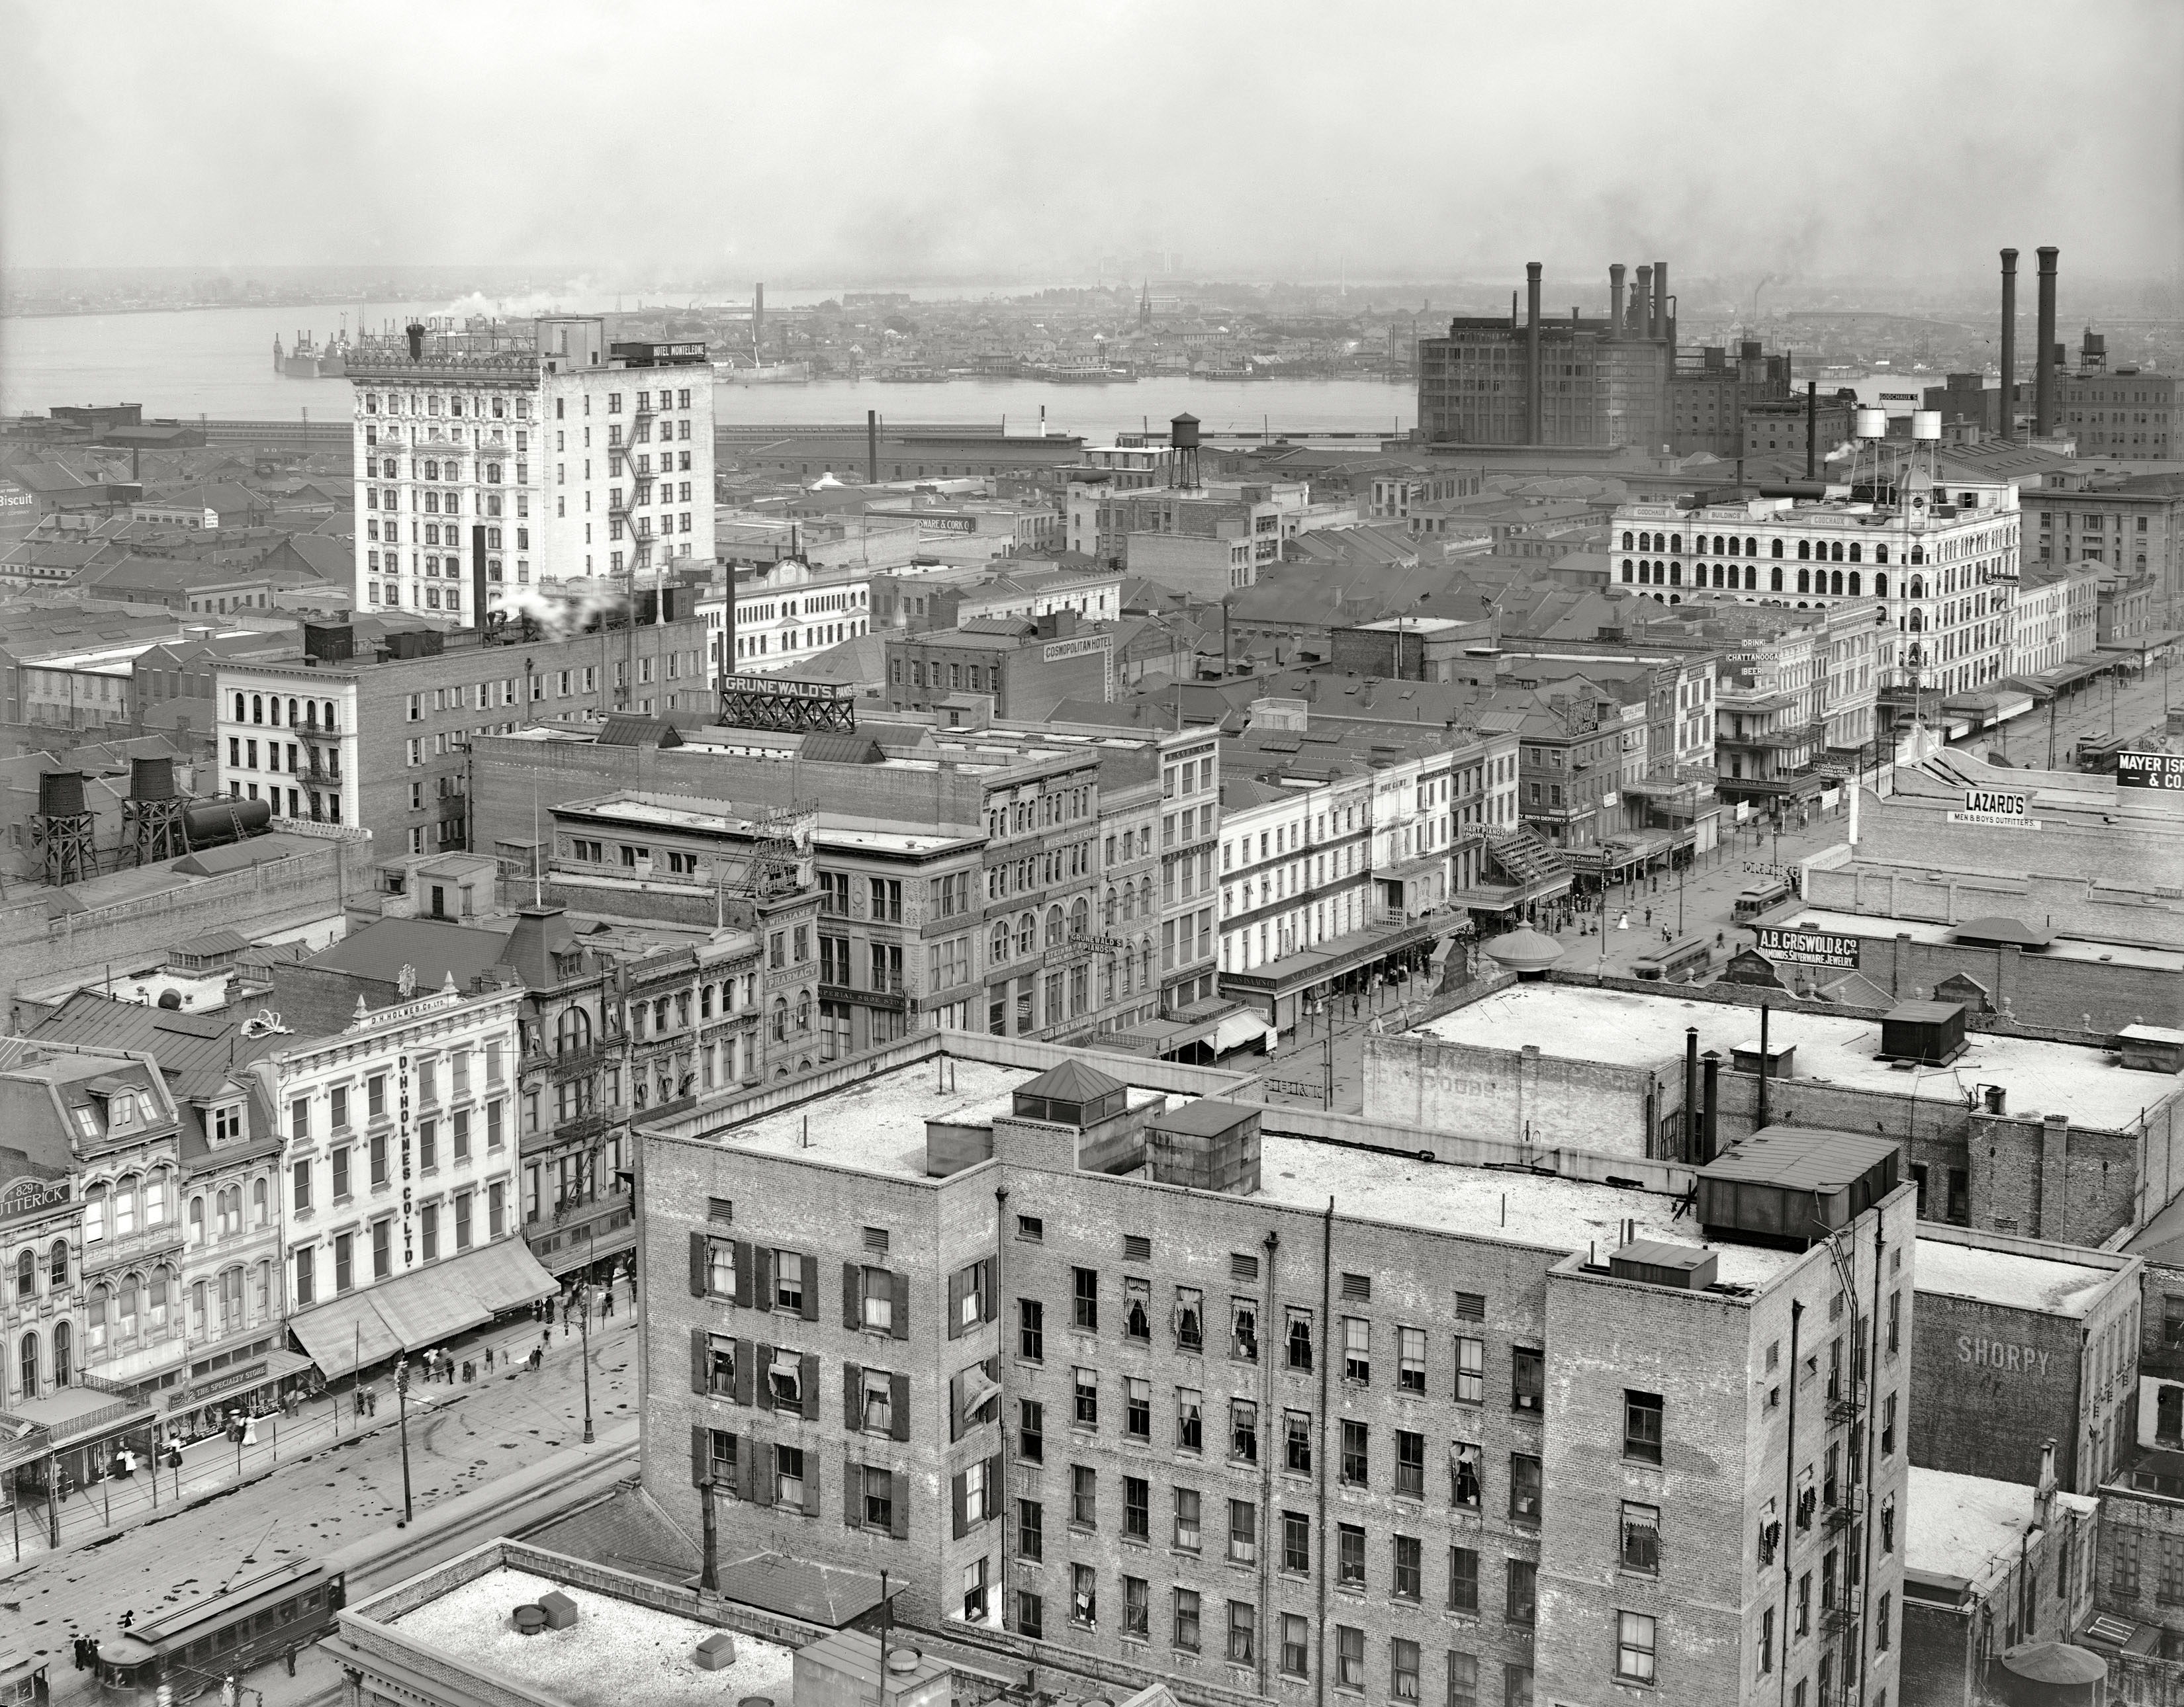 Circa 1910. "New Orleans and the Mississippi River from Grunewald." A bird's eye view of Canal Street from the Grunewald Hotel. Merchants here include Godchaux's music store as well as the big Godchaux's department store farther down the street, D.H. Holmes Co., B. Cohn Dry Goods, Marks Isaacs Co. and a One-Cent Vaudeville theater. And if all this shopping has made you thirsty: Drink Chattanooga Beer. 8x10 glass negative, Detroit Publishing Co. View full size.